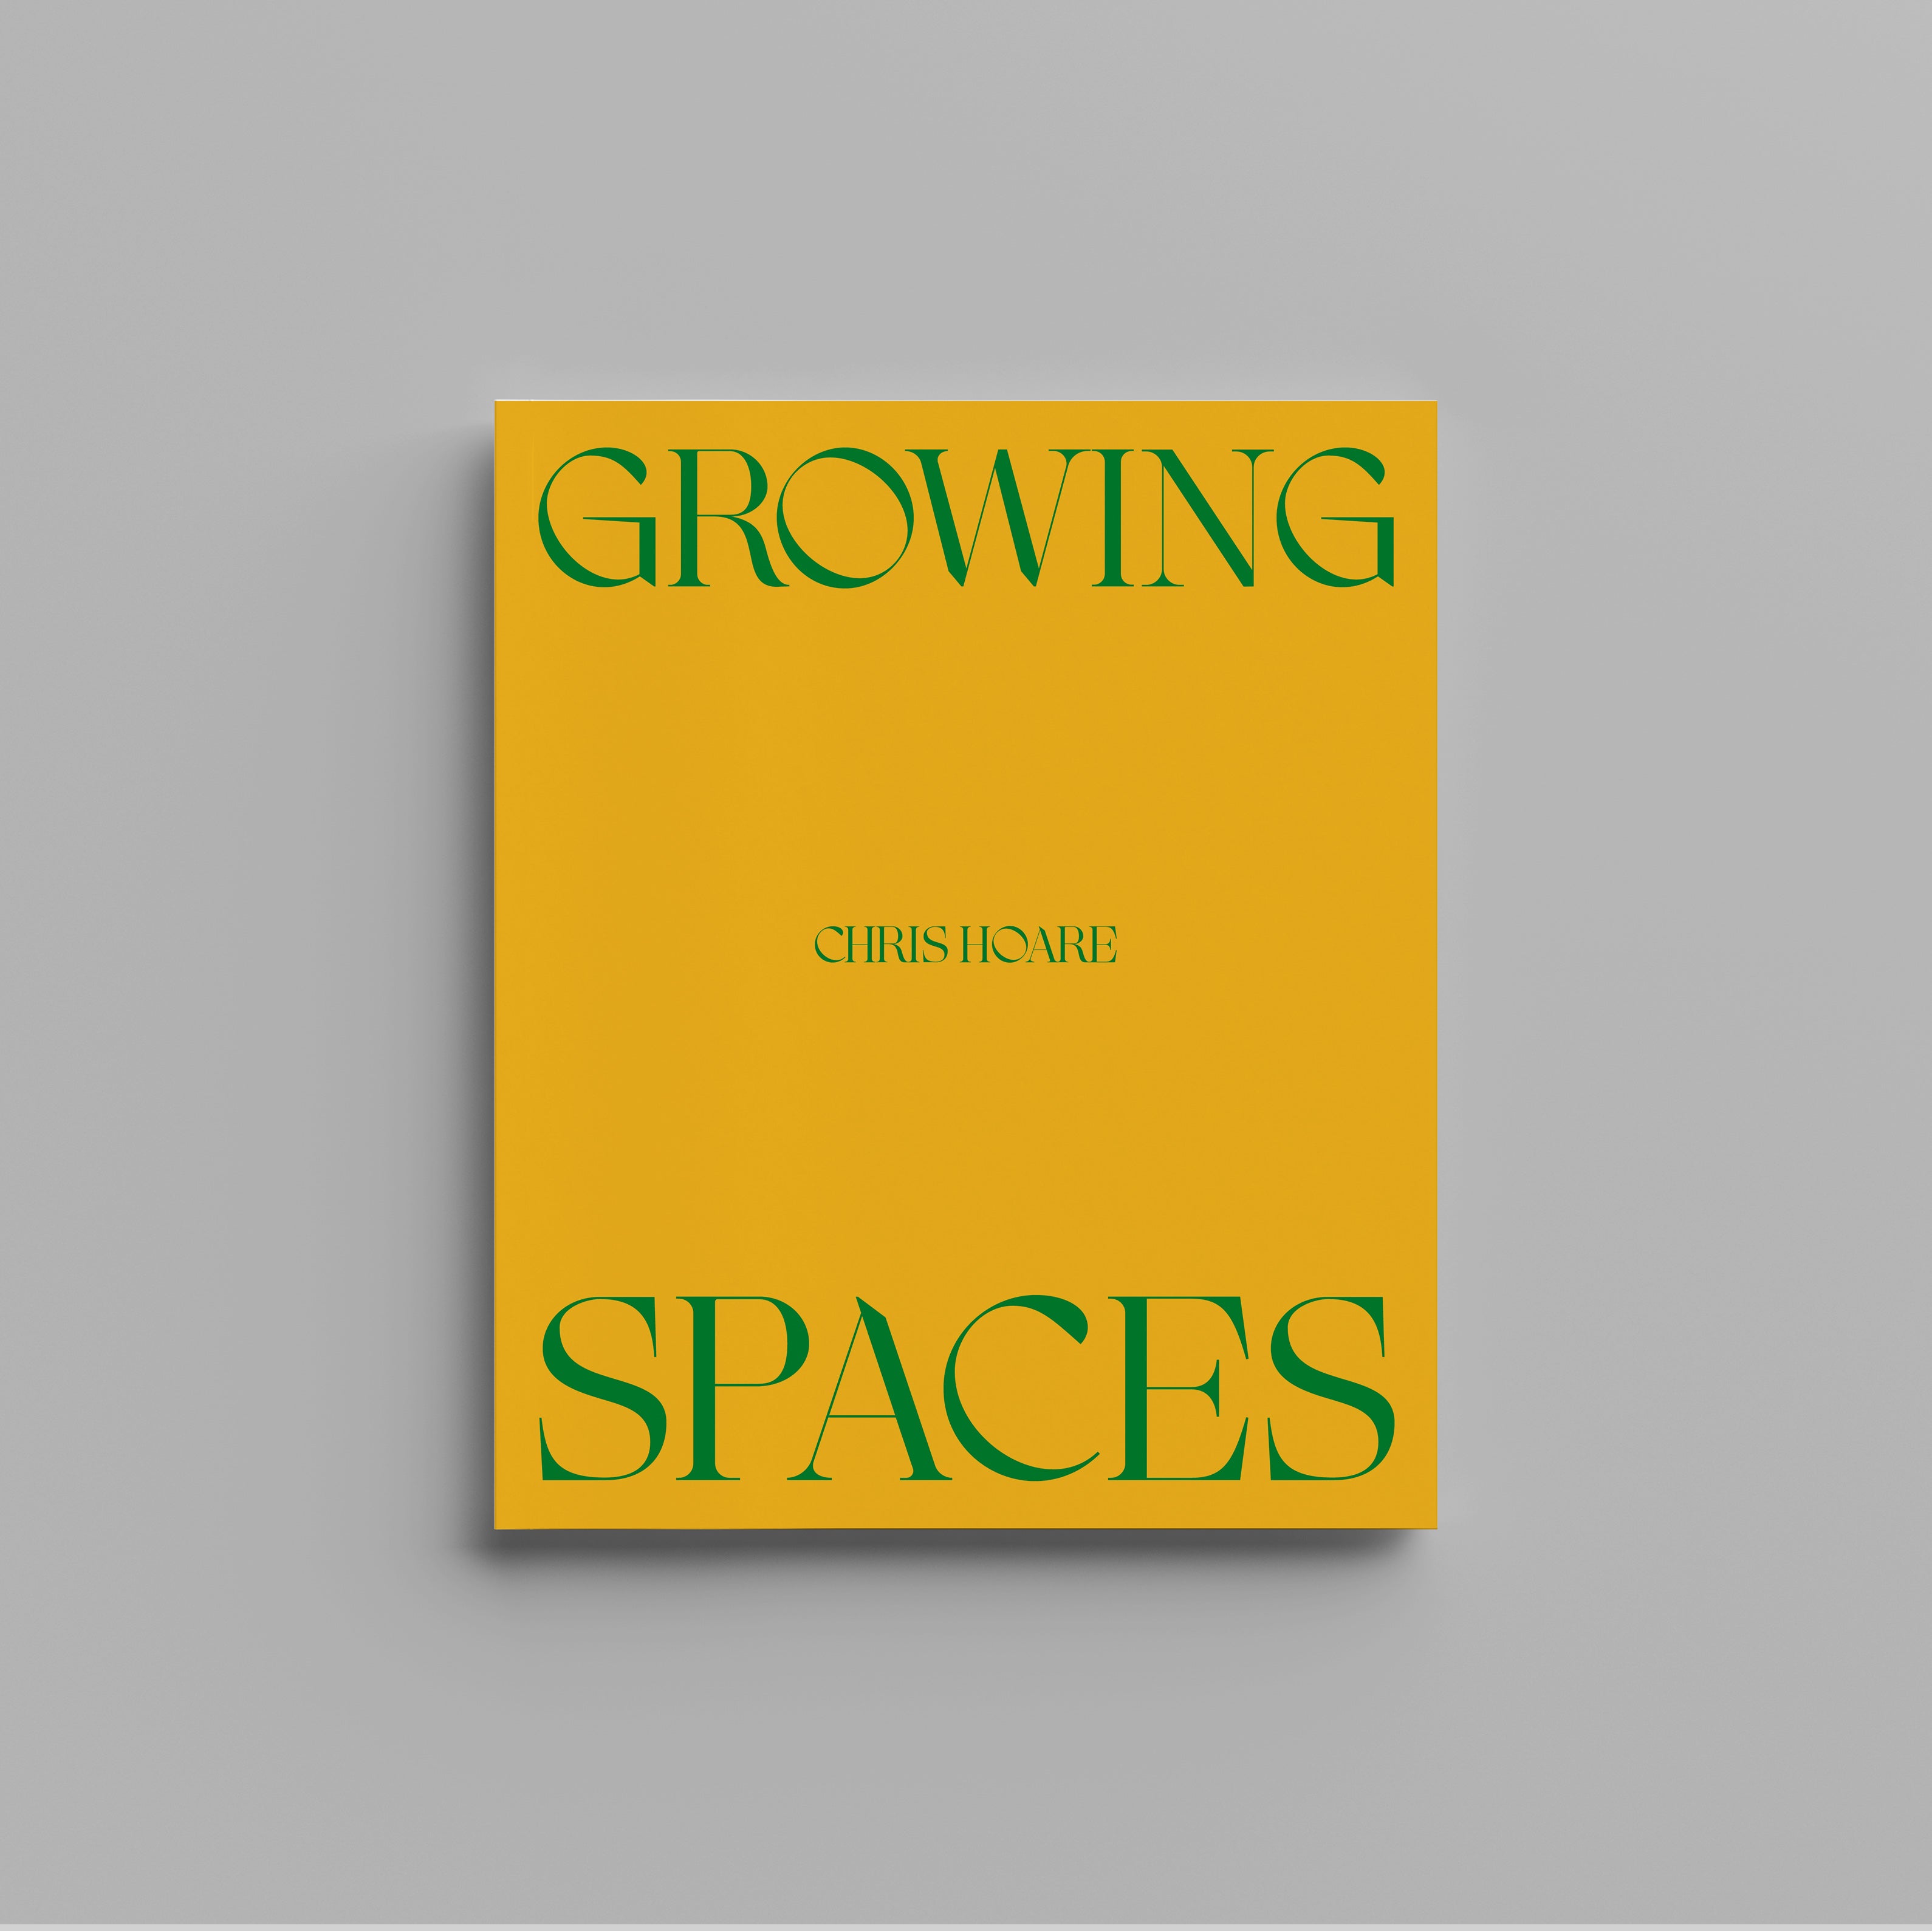 Growing Spaces